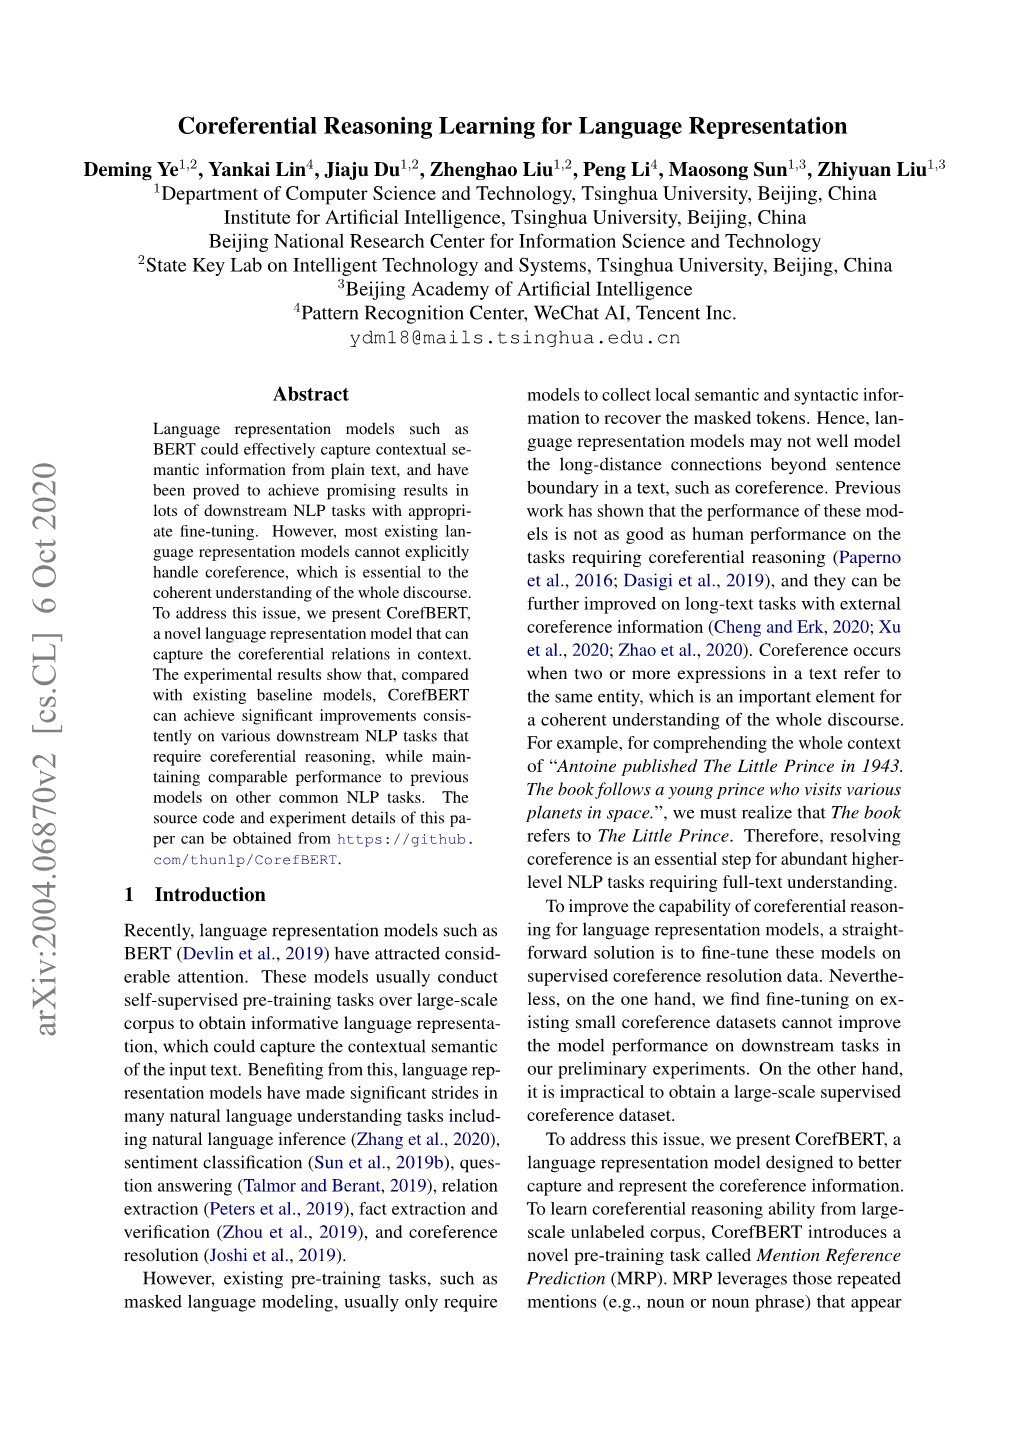 Arxiv:2004.06870V2 [Cs.CL] 6 Oct 2020 Tion, Which Could Capture the Contextual Semantic the Model Performance on Downstream Tasks in of the Input Text